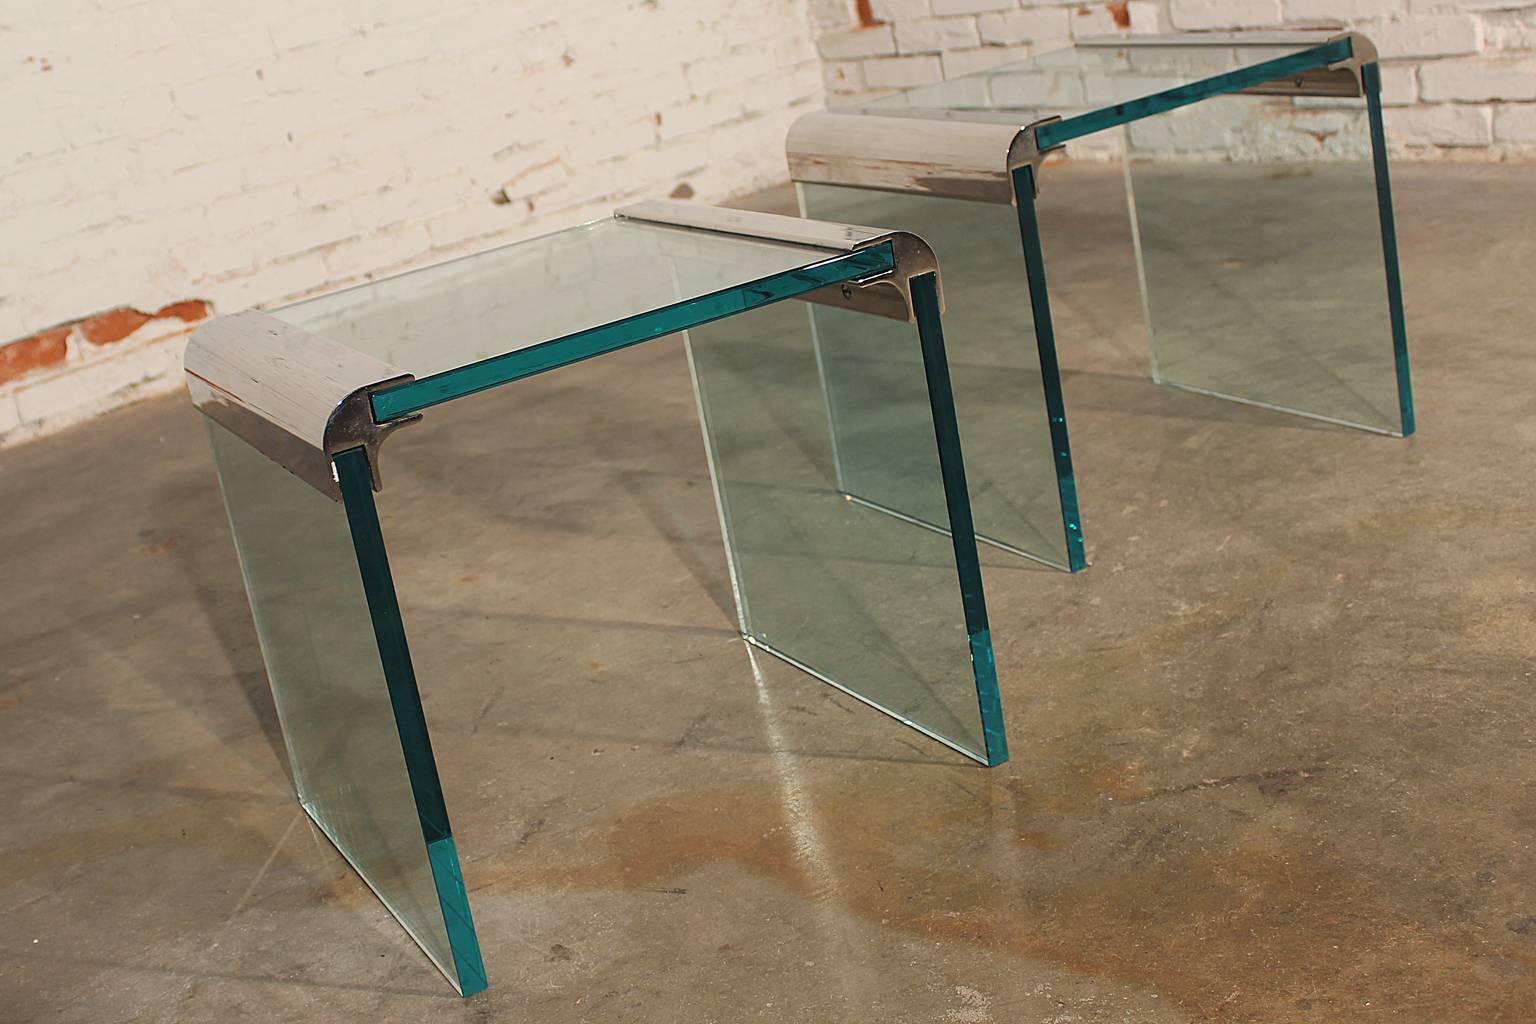 Fabulous pair of chrome and glass waterfall side tables by The Pace Collection, circa 1970s and in good vintage condition.

The Pace Collection provided high end contemporary furniture from 1960-2001. The company was founded by Irving and Leon